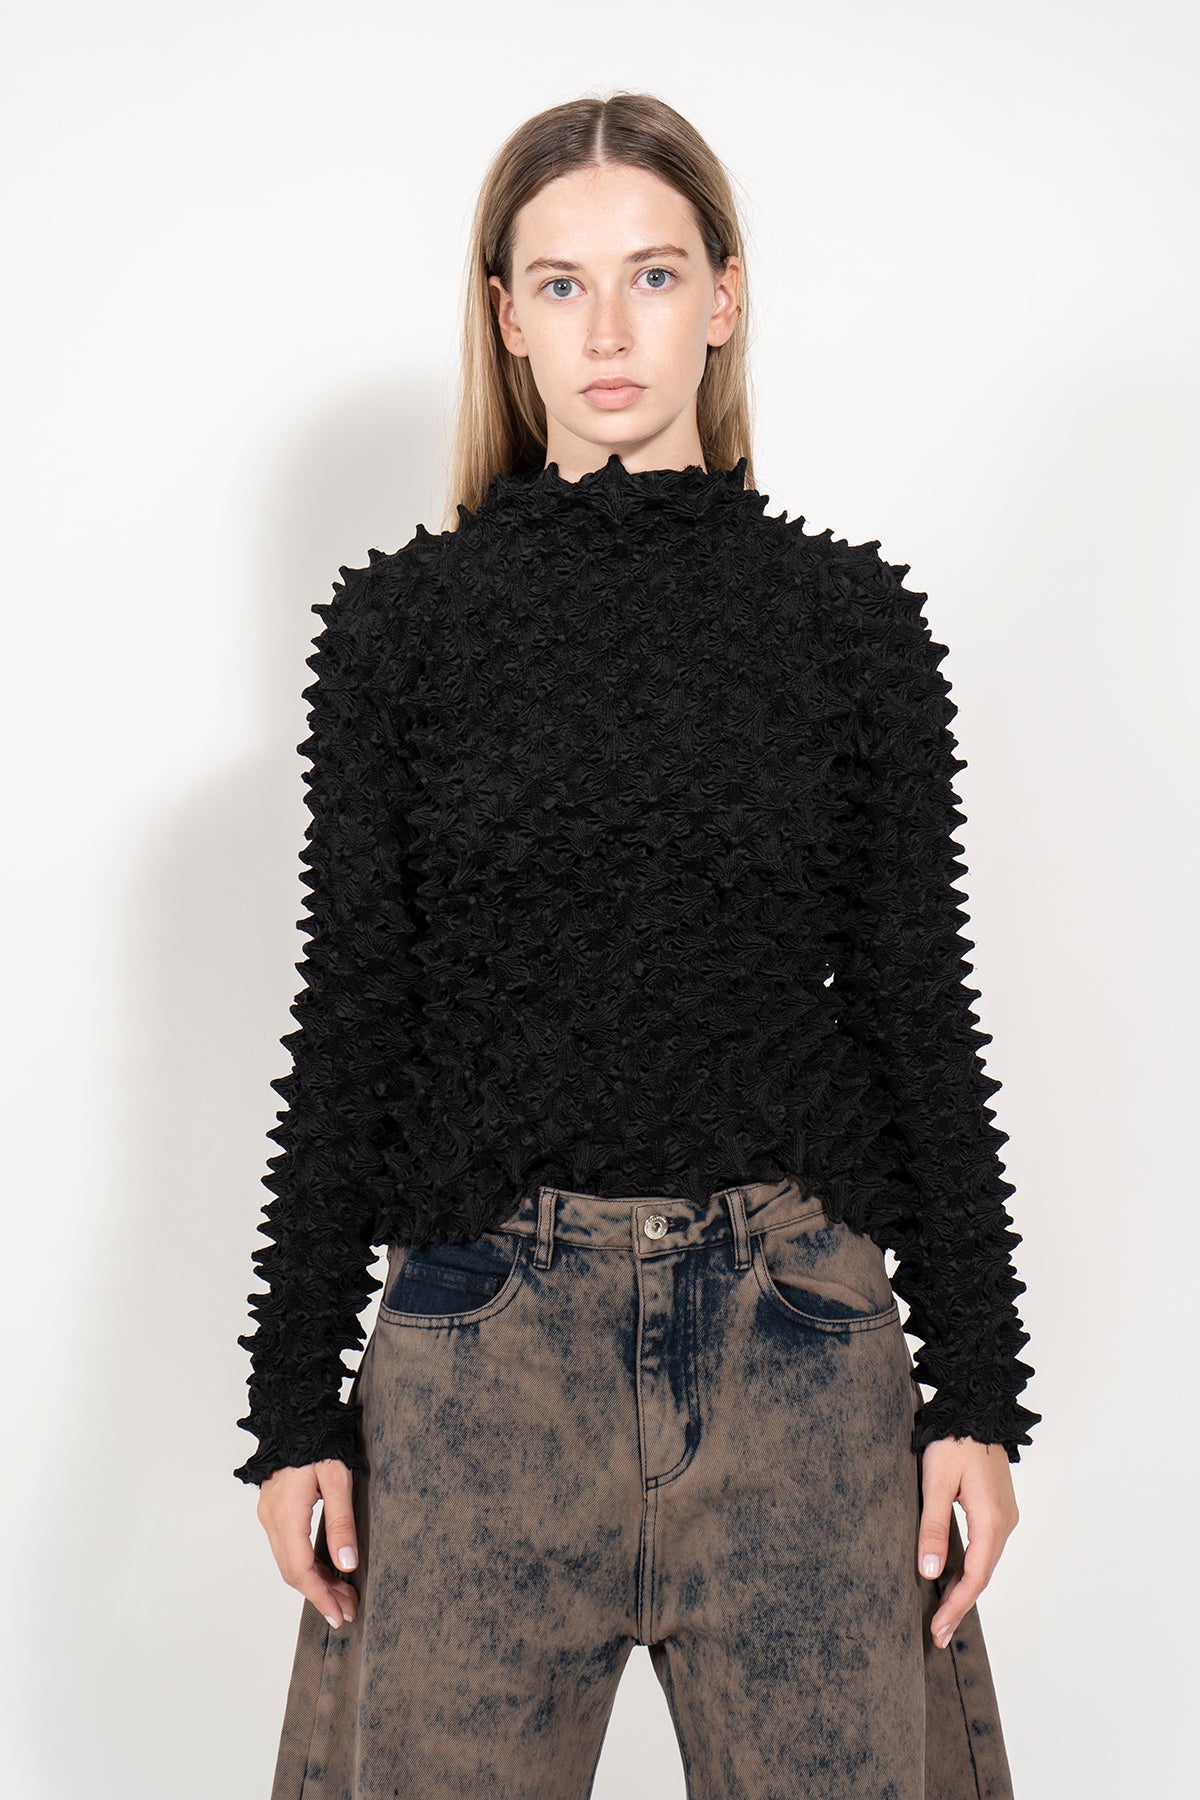 BLACK SPIKED TOP MARQUES ALMEIDA